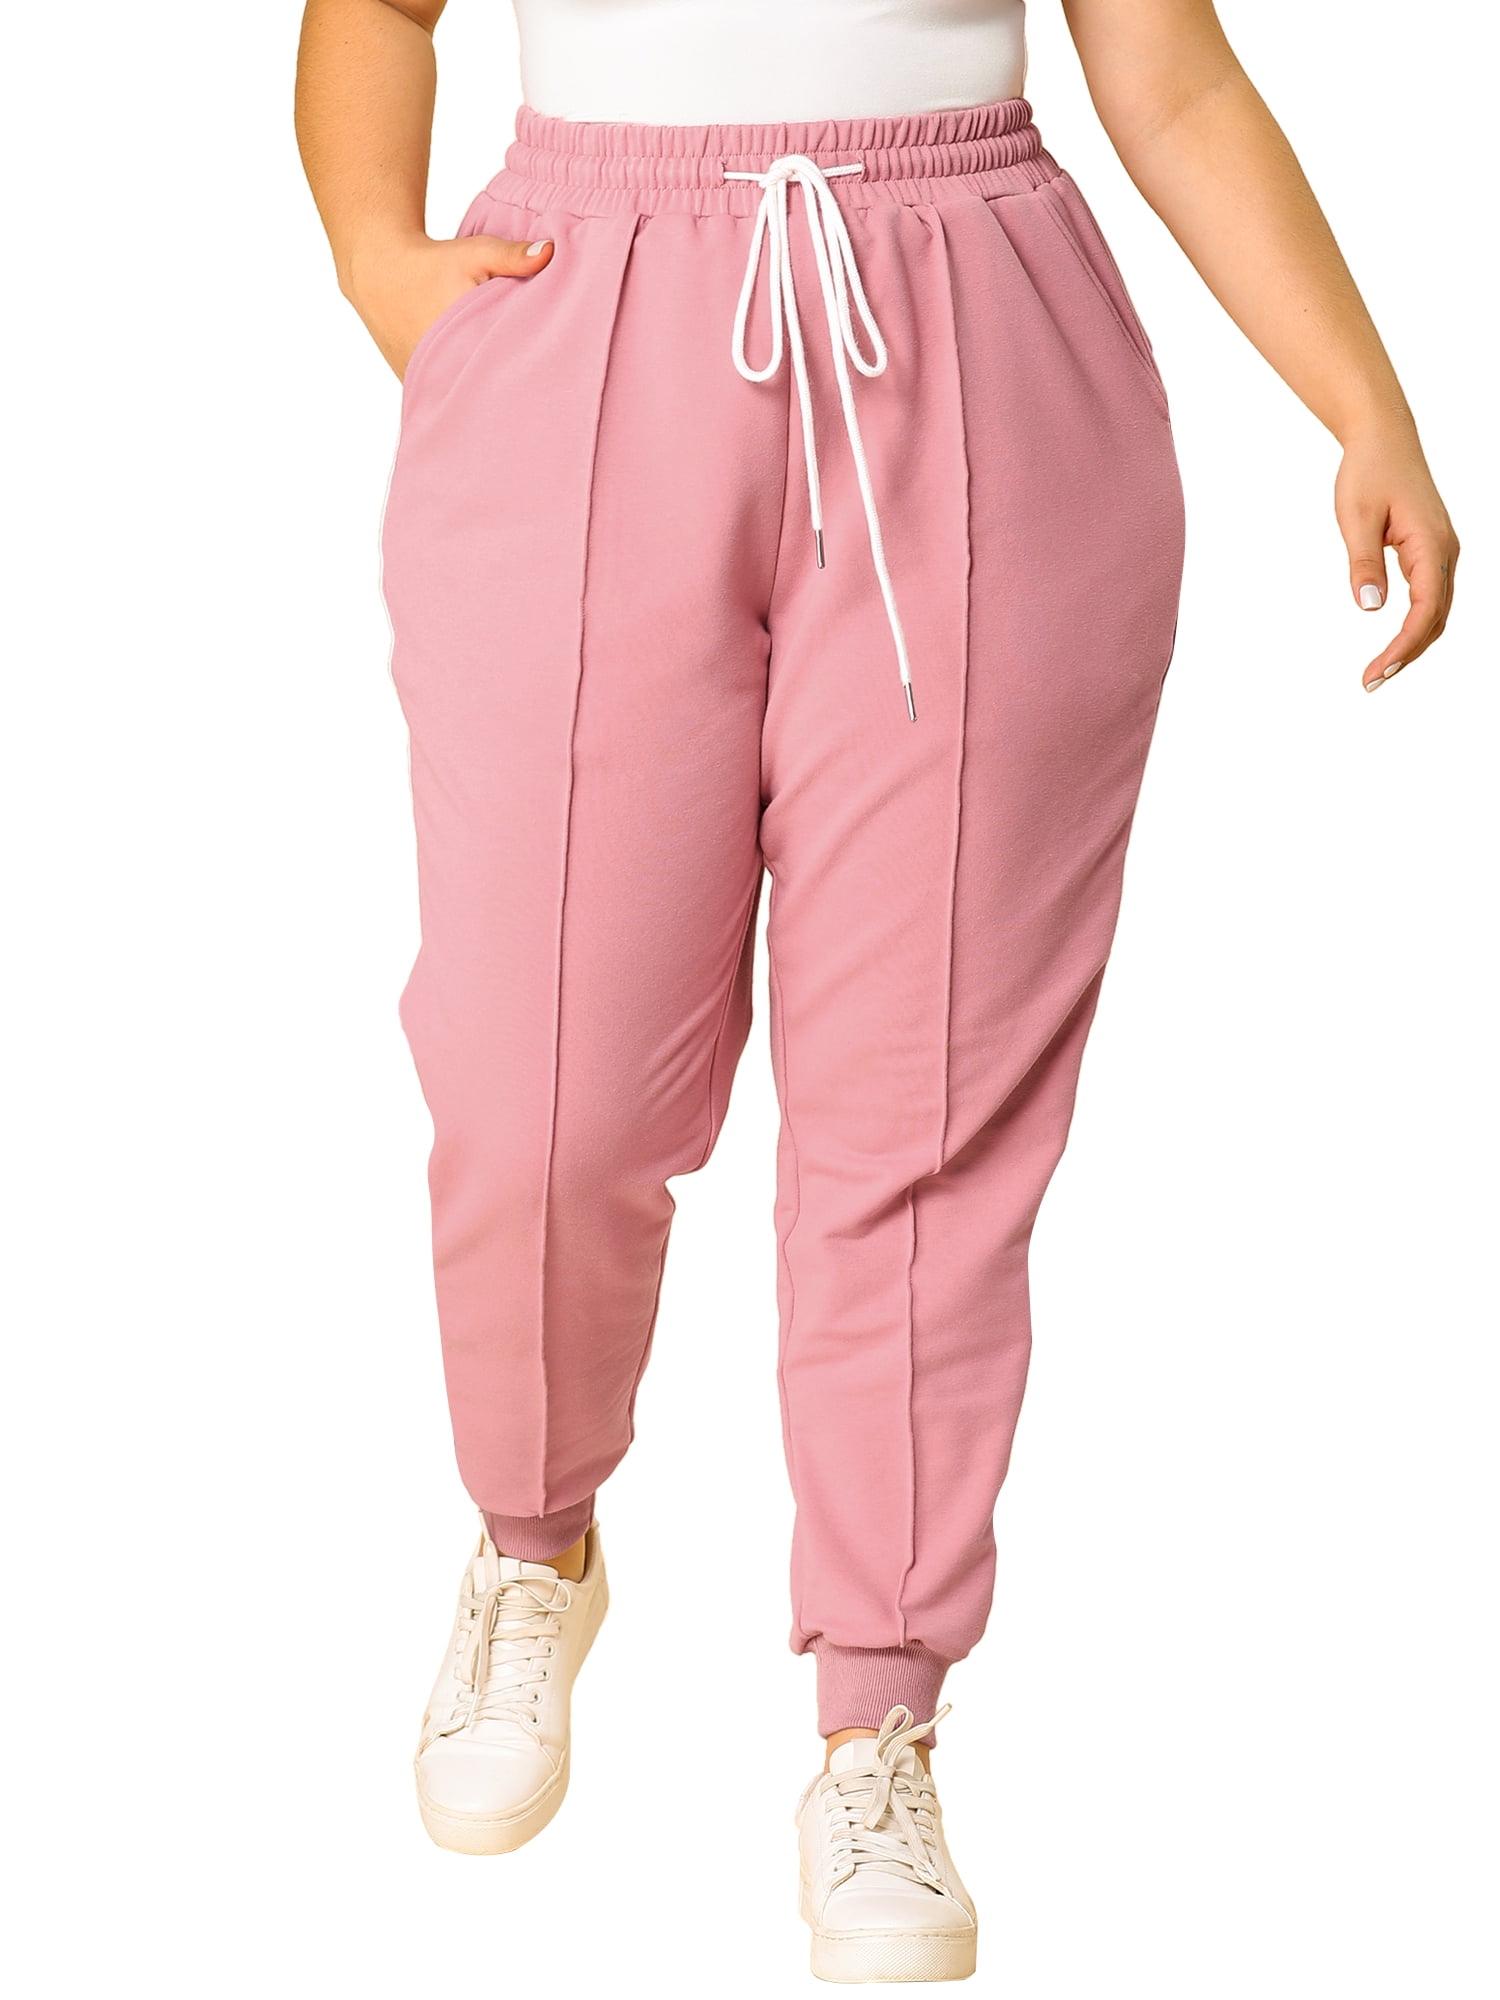 Indero Women's Plus Size Ultra Soft Jogger Relaxed Fit Style Sweatpants  with Side Pocket Gold Zipper - Mesa Rose 3X